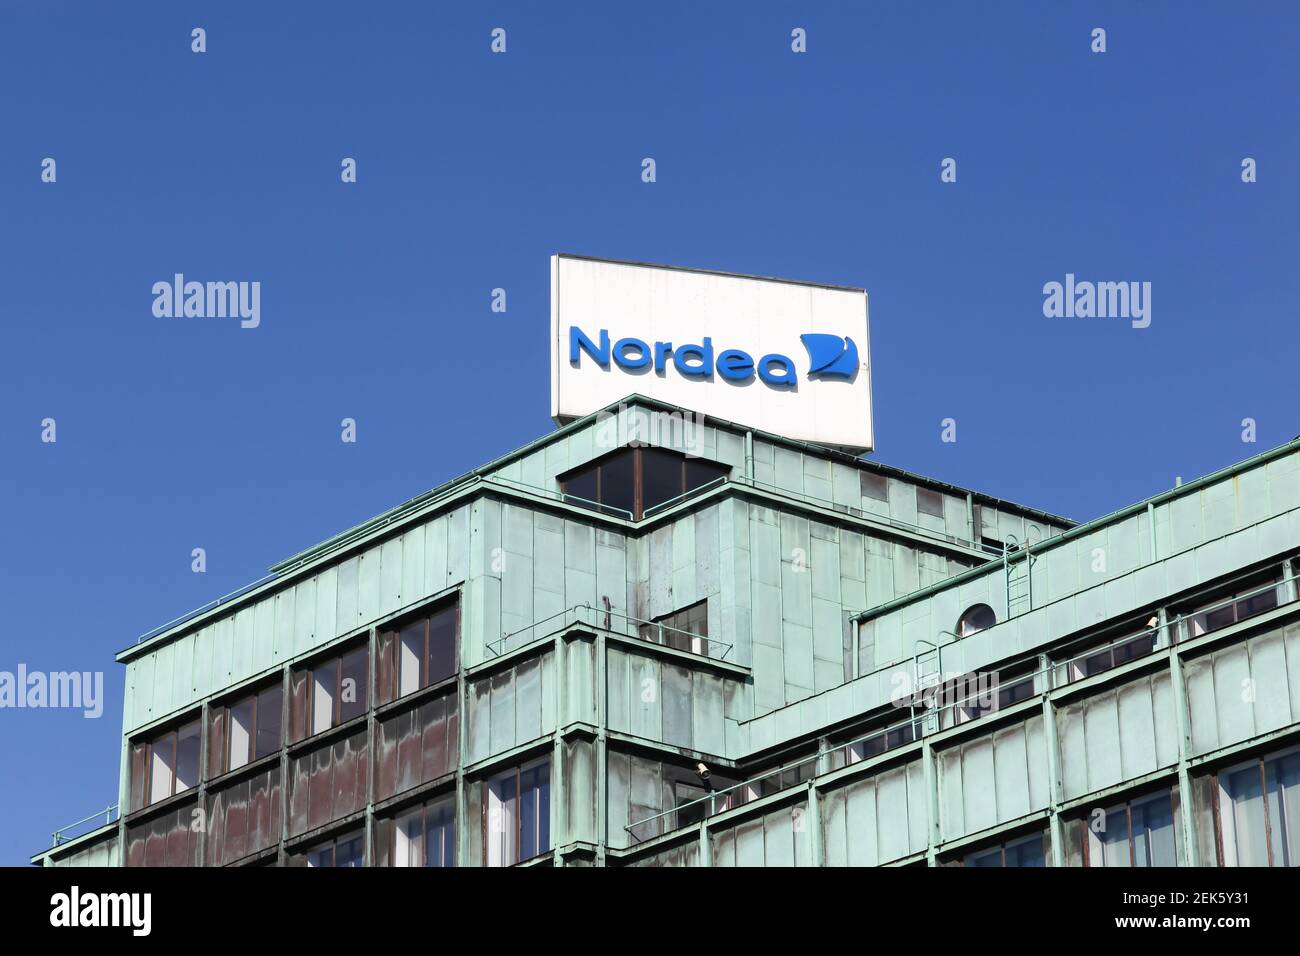 Copenhagen, Denmark - April 15, 2019: Nordea bank office building. Nordea bank is a Swedish financial services group operating in Northern Europe Stock Photo